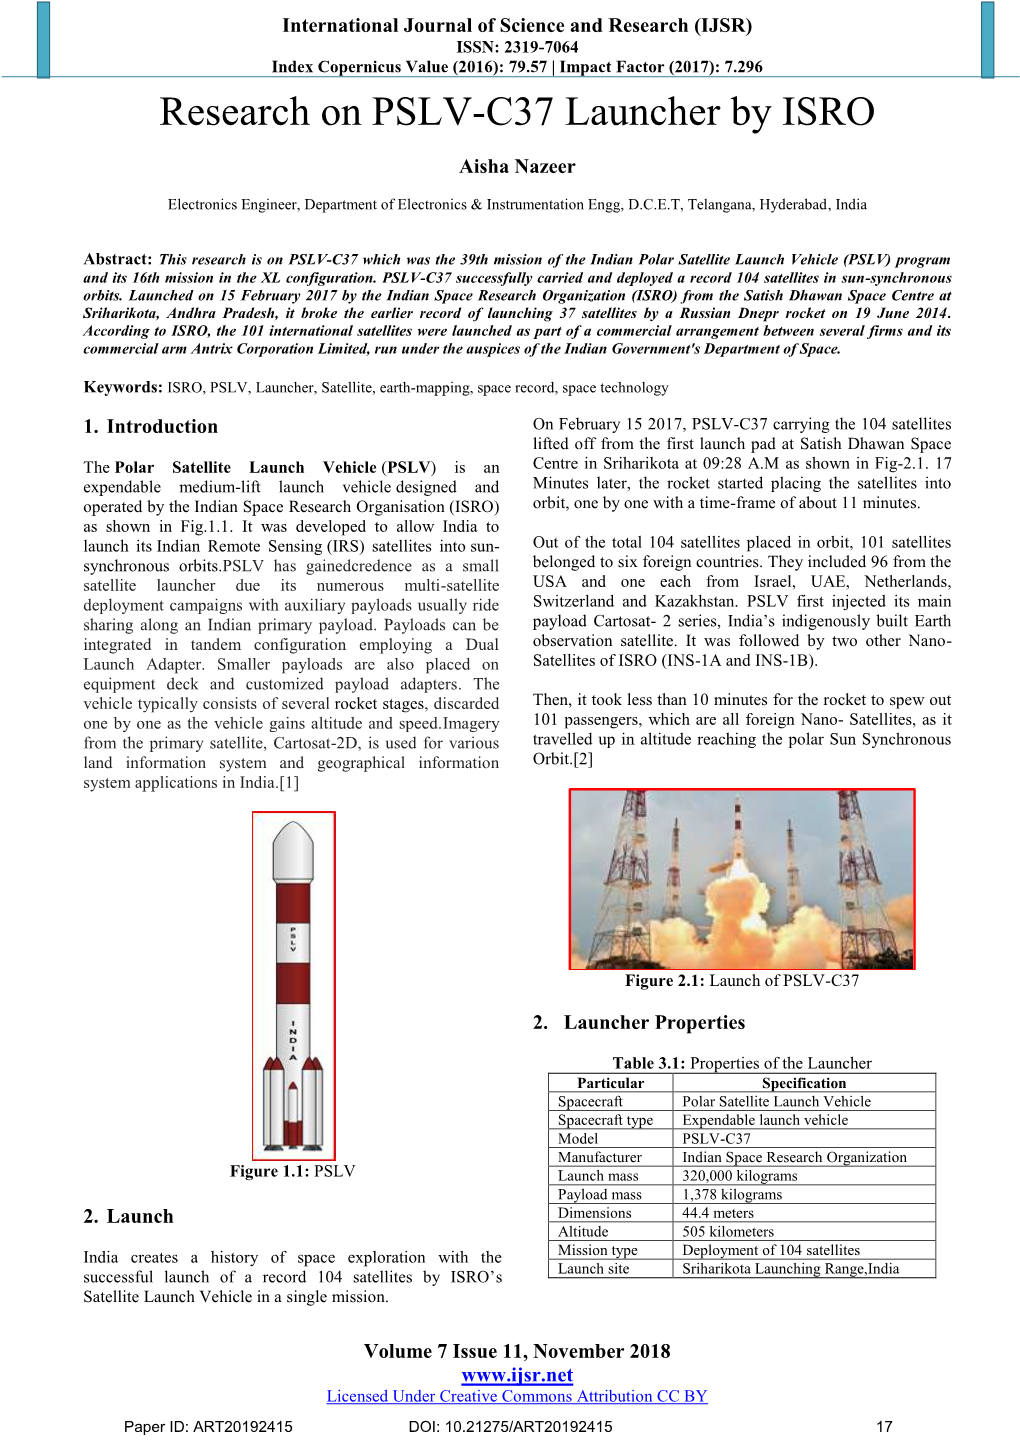 Research on PSLV-C37 Launcher by ISRO